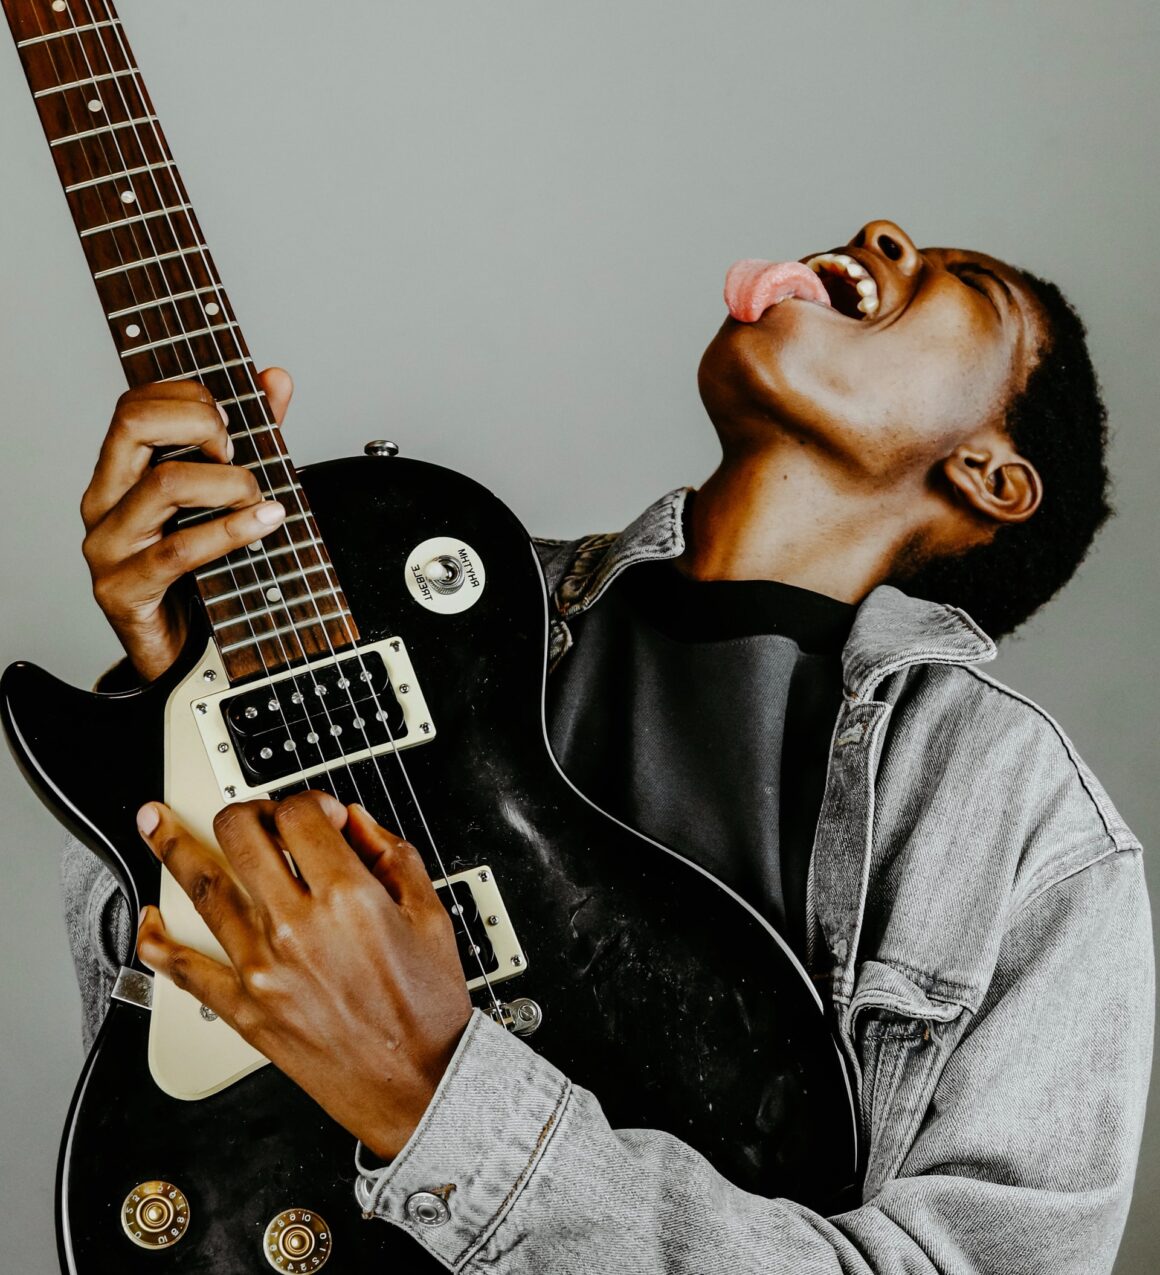 A black man playing an electric guitar with his tongue out, showcasing his incredible talent in the realm of blues or jazz music. This captivating image is a testament to the rich and vibrant history of